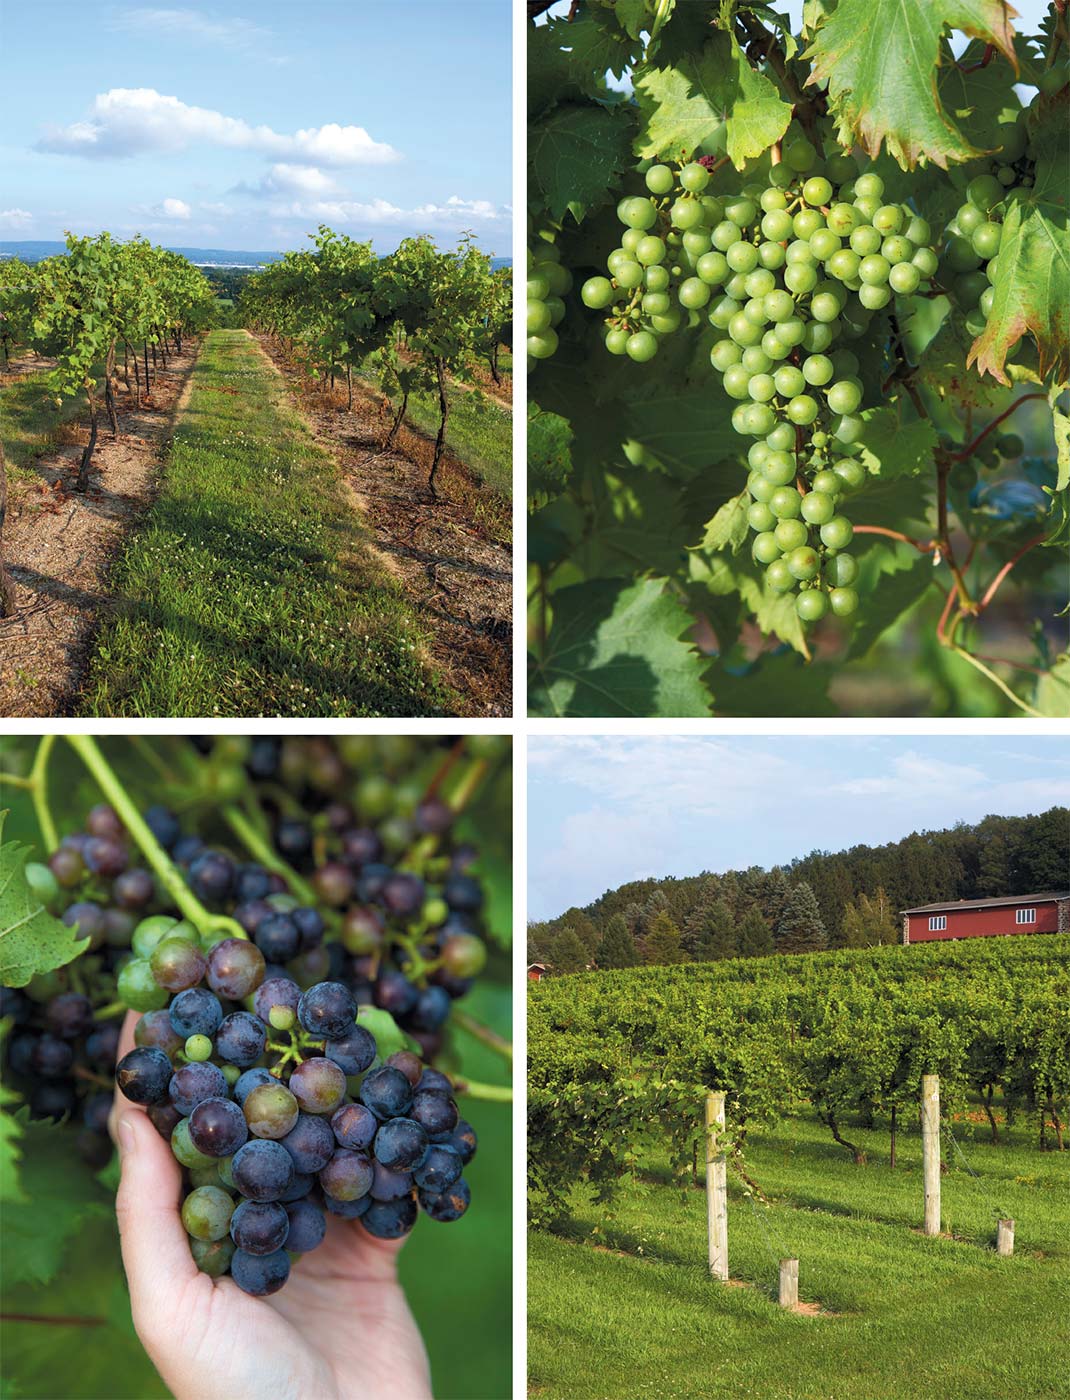 top row photos, Vyncrest's vineyards and unripe grapes. Bottom row, ripening grapes and Clover Hill vineyard